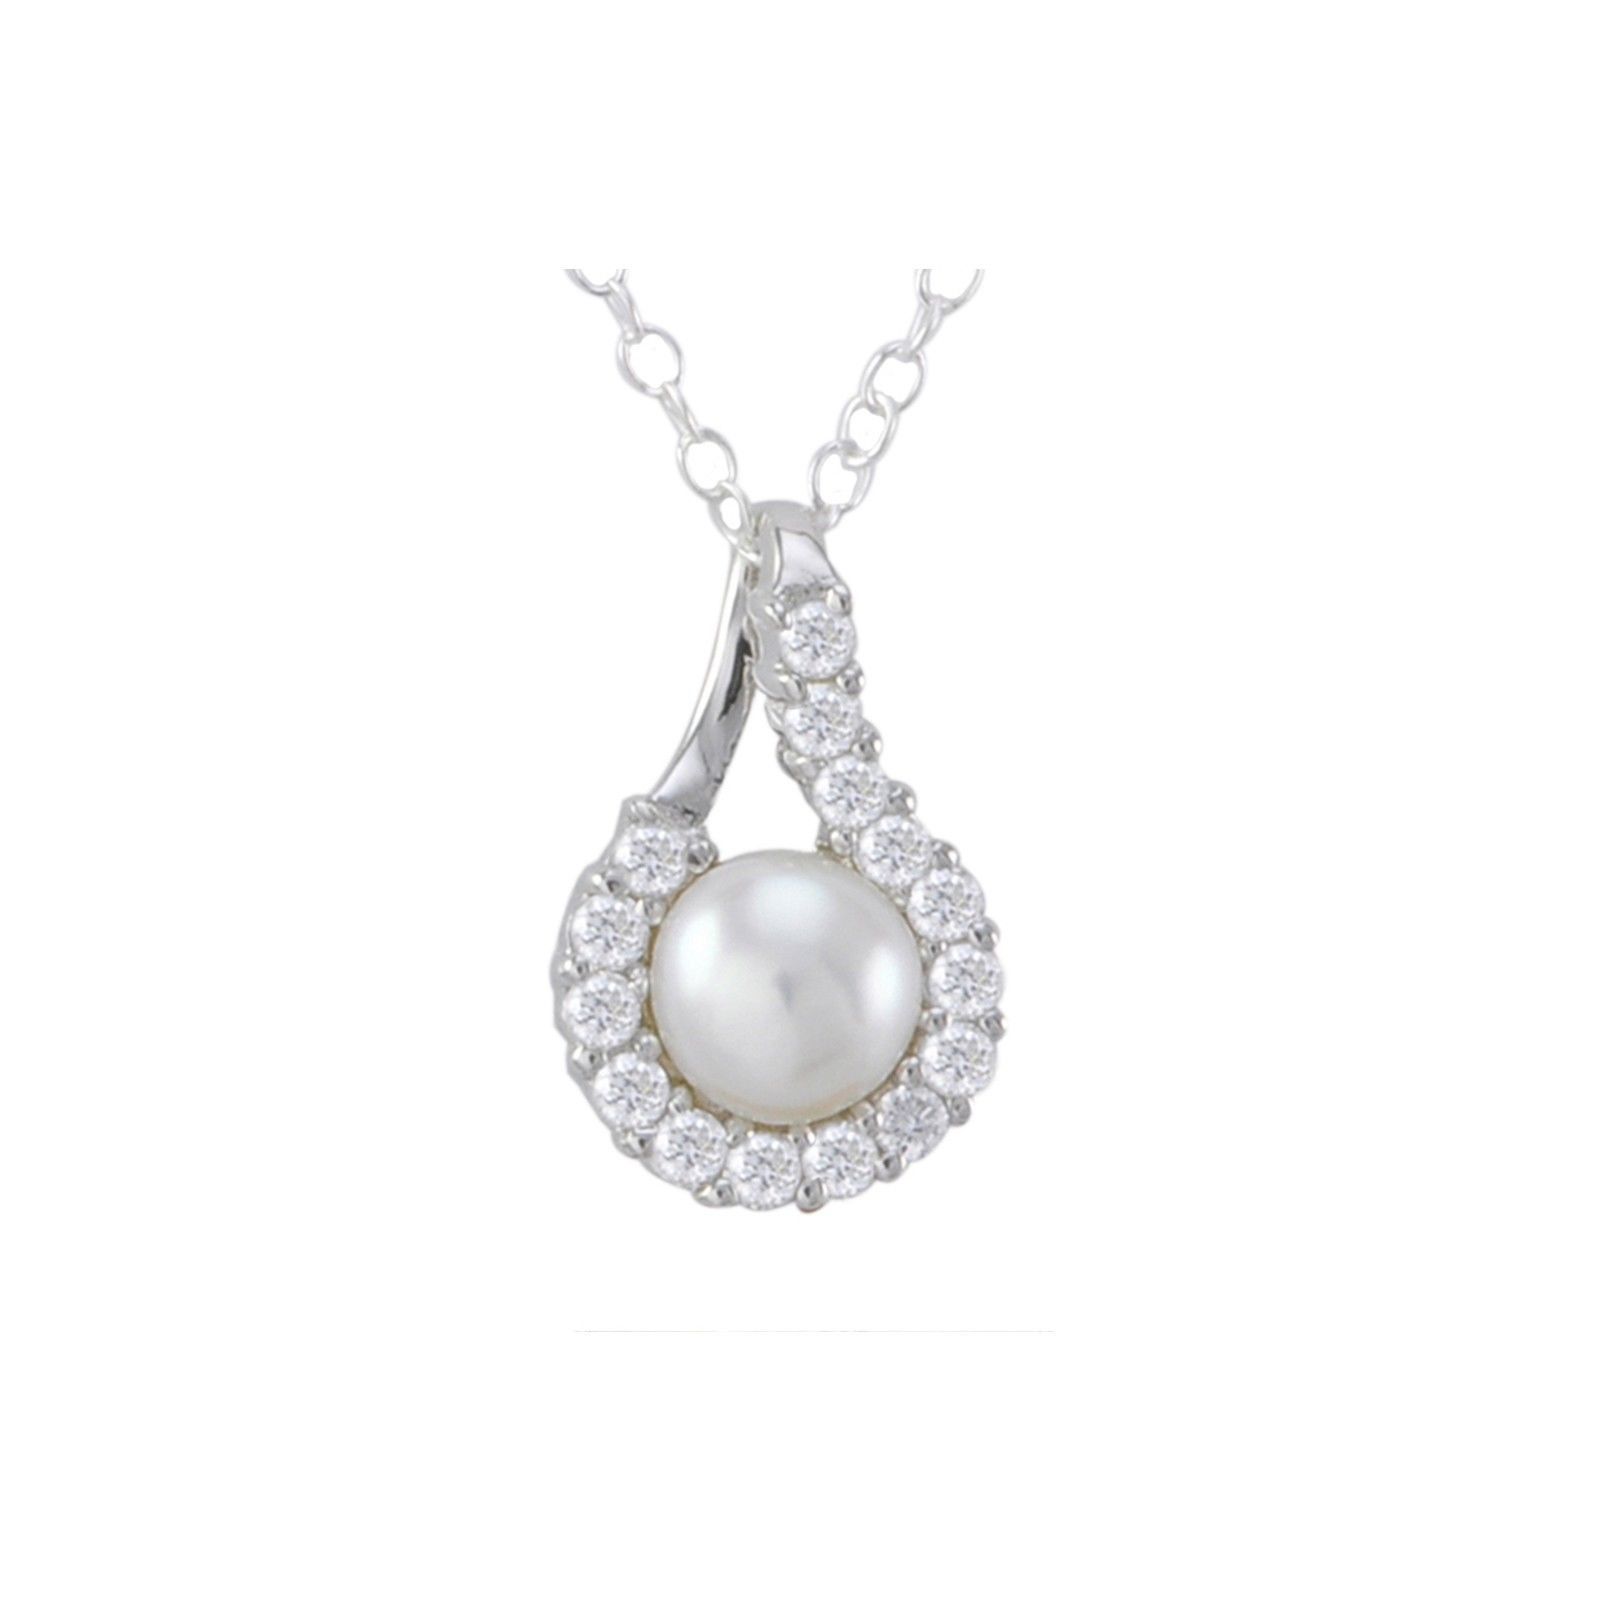 White Freshwater Pearl Sterling Silver Necklace w/ Fancy CZ Surround, 18" Chain - $22.99